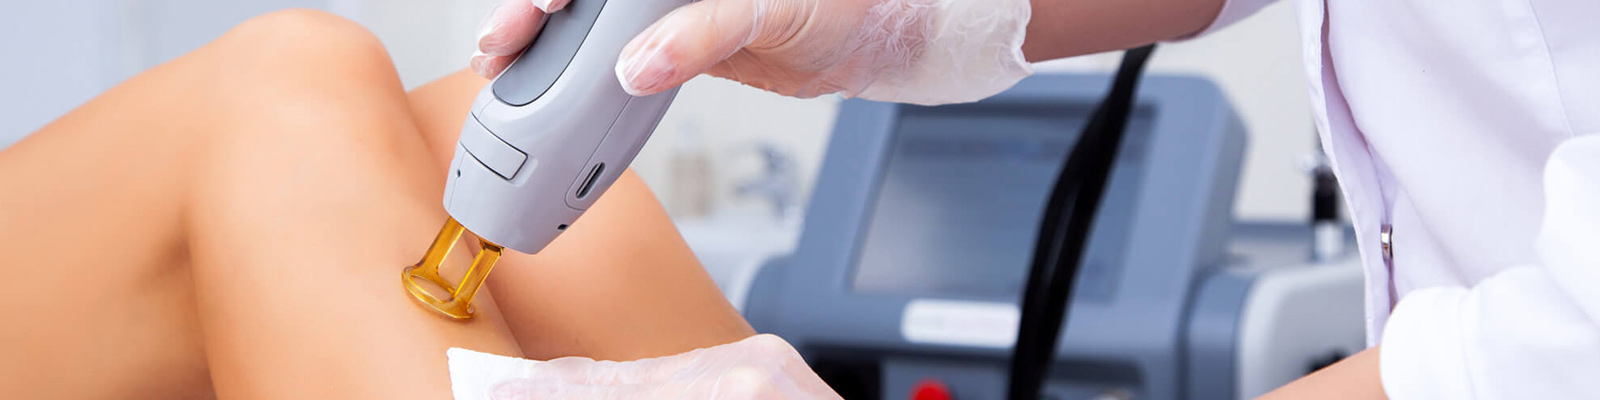 Laser Cosmetology (Hair Removal)